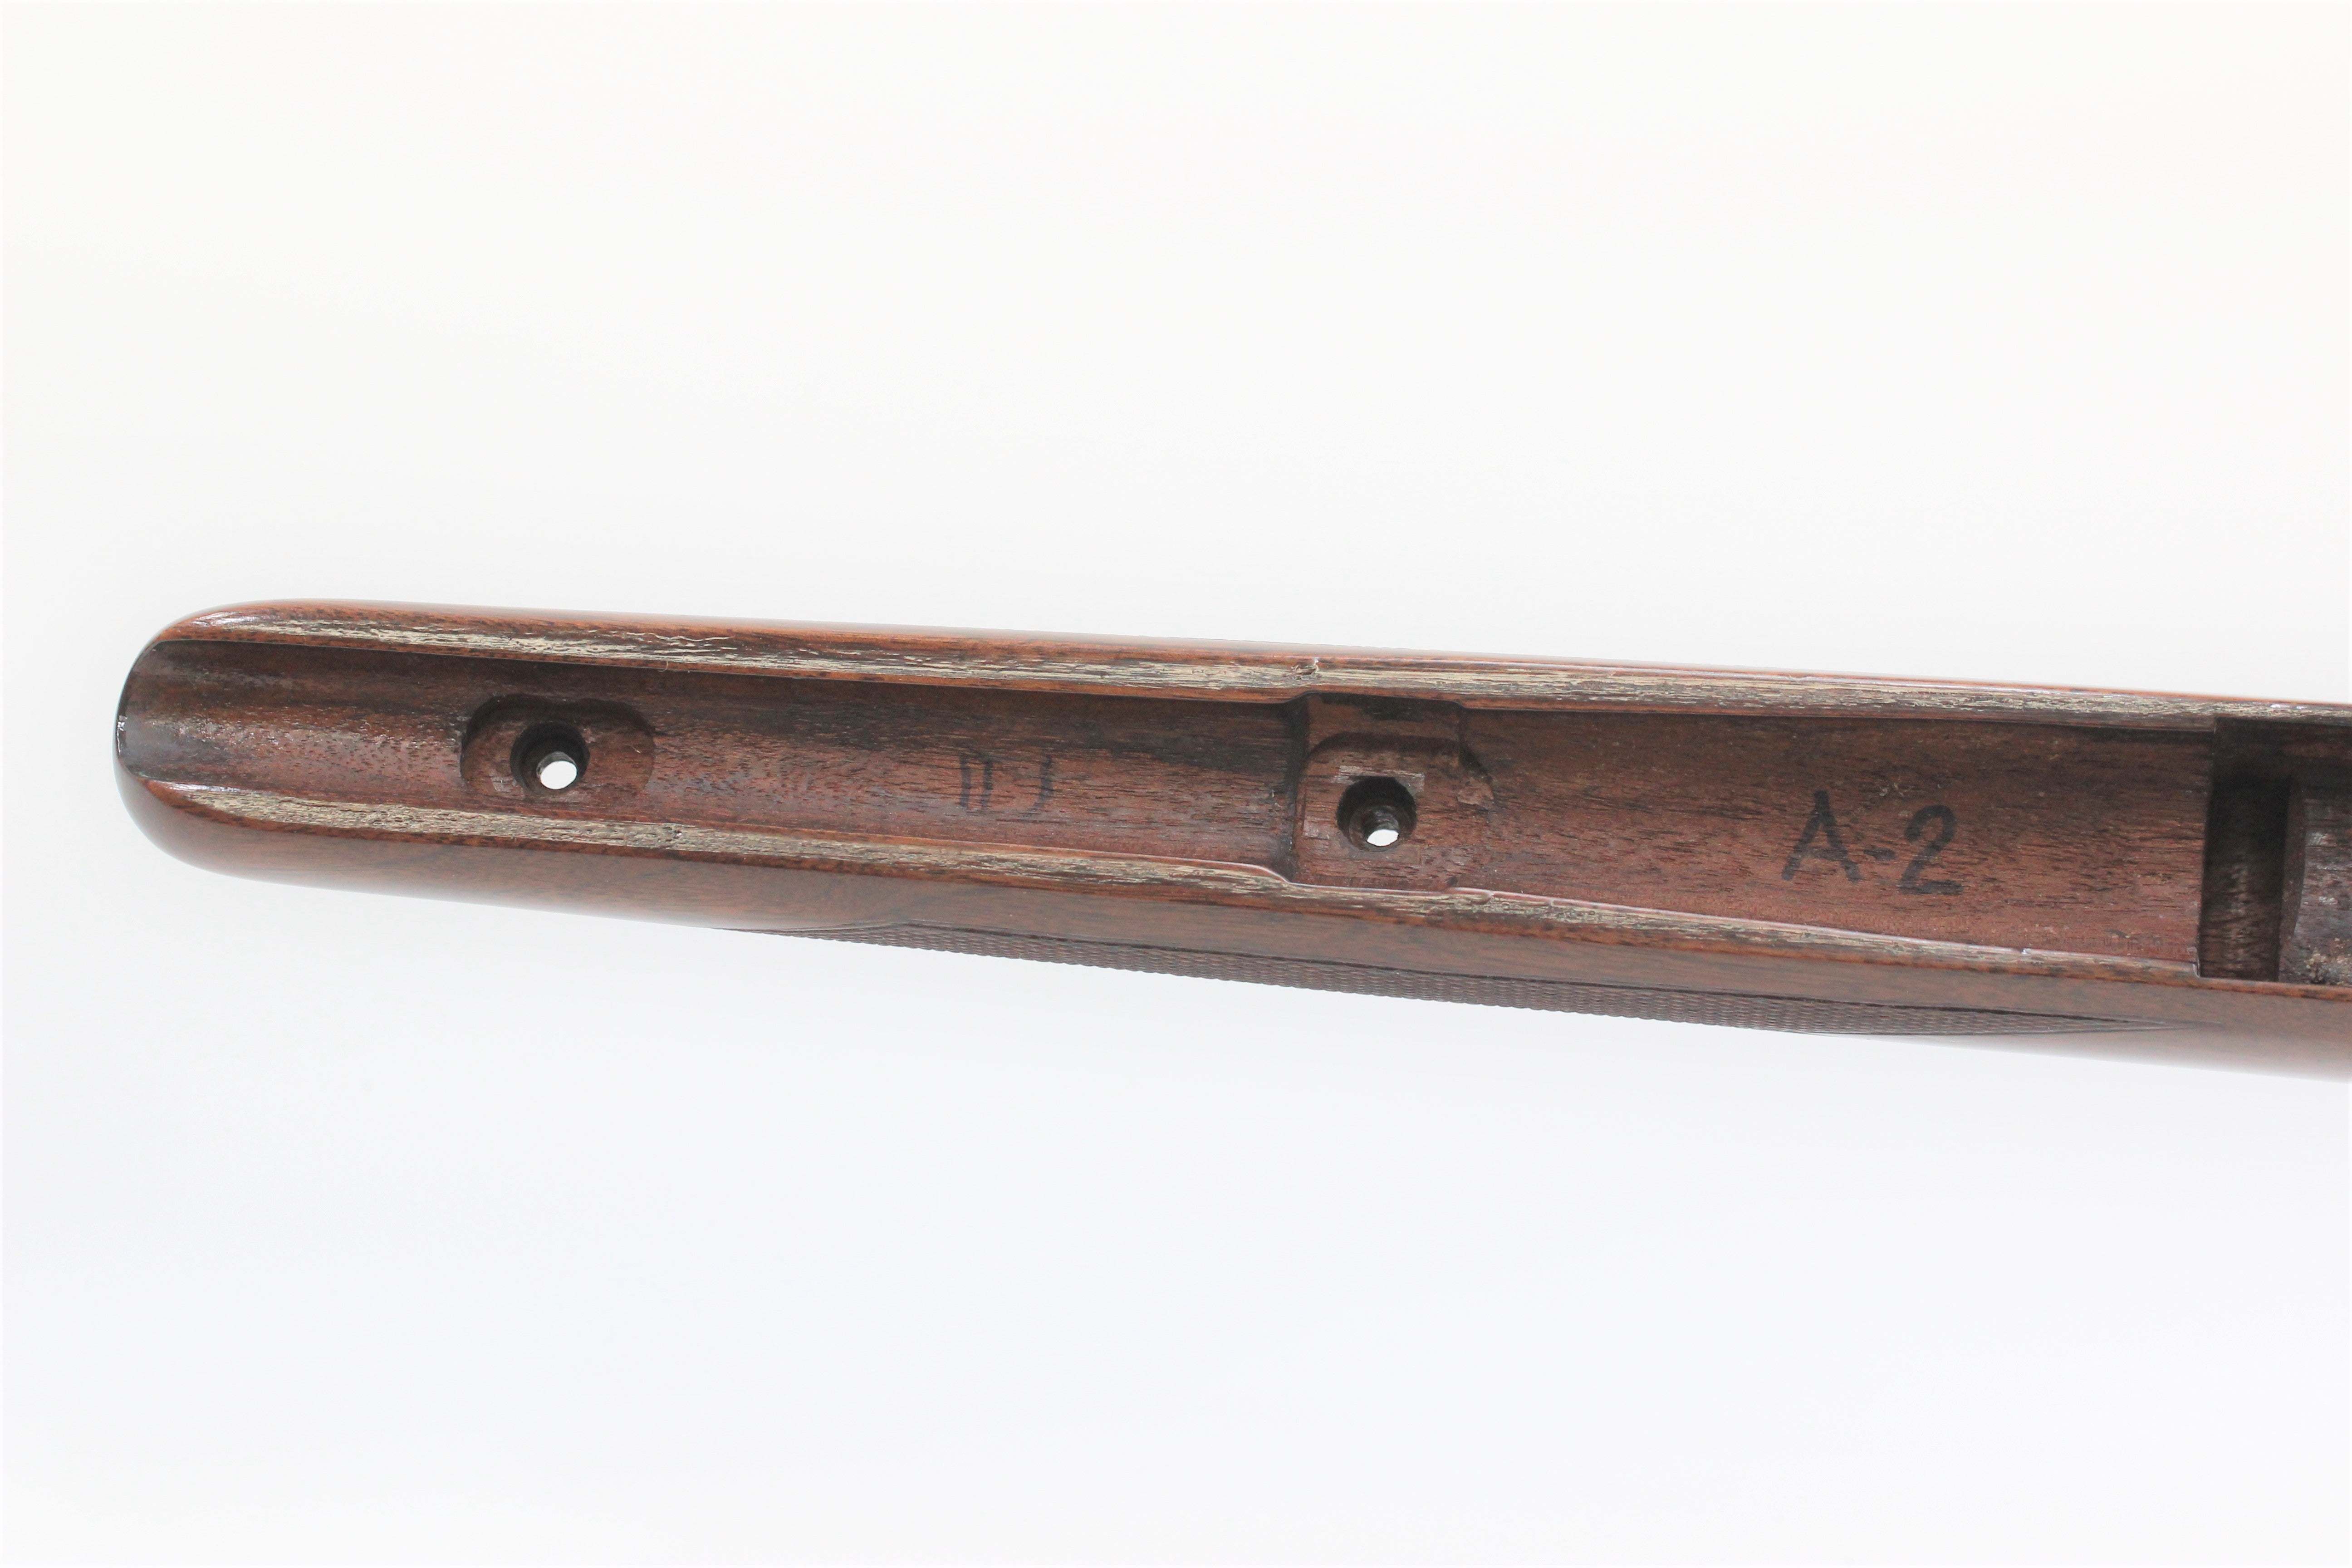 1950-1958 Low Comb Standard Rifle Stock